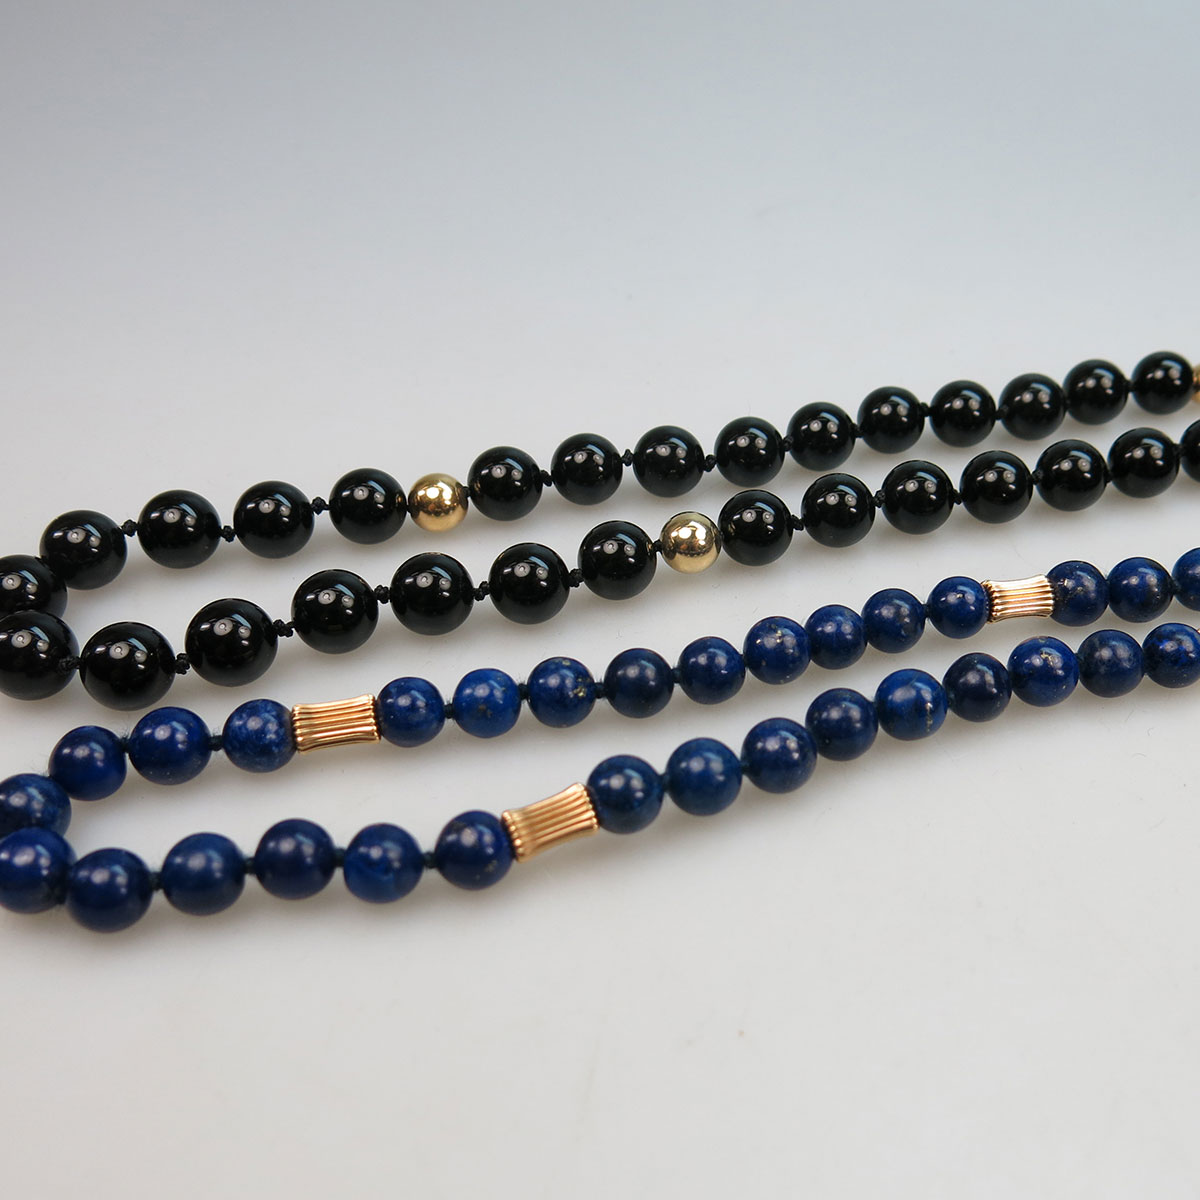 Lapis And Onyx Bead Necklaces